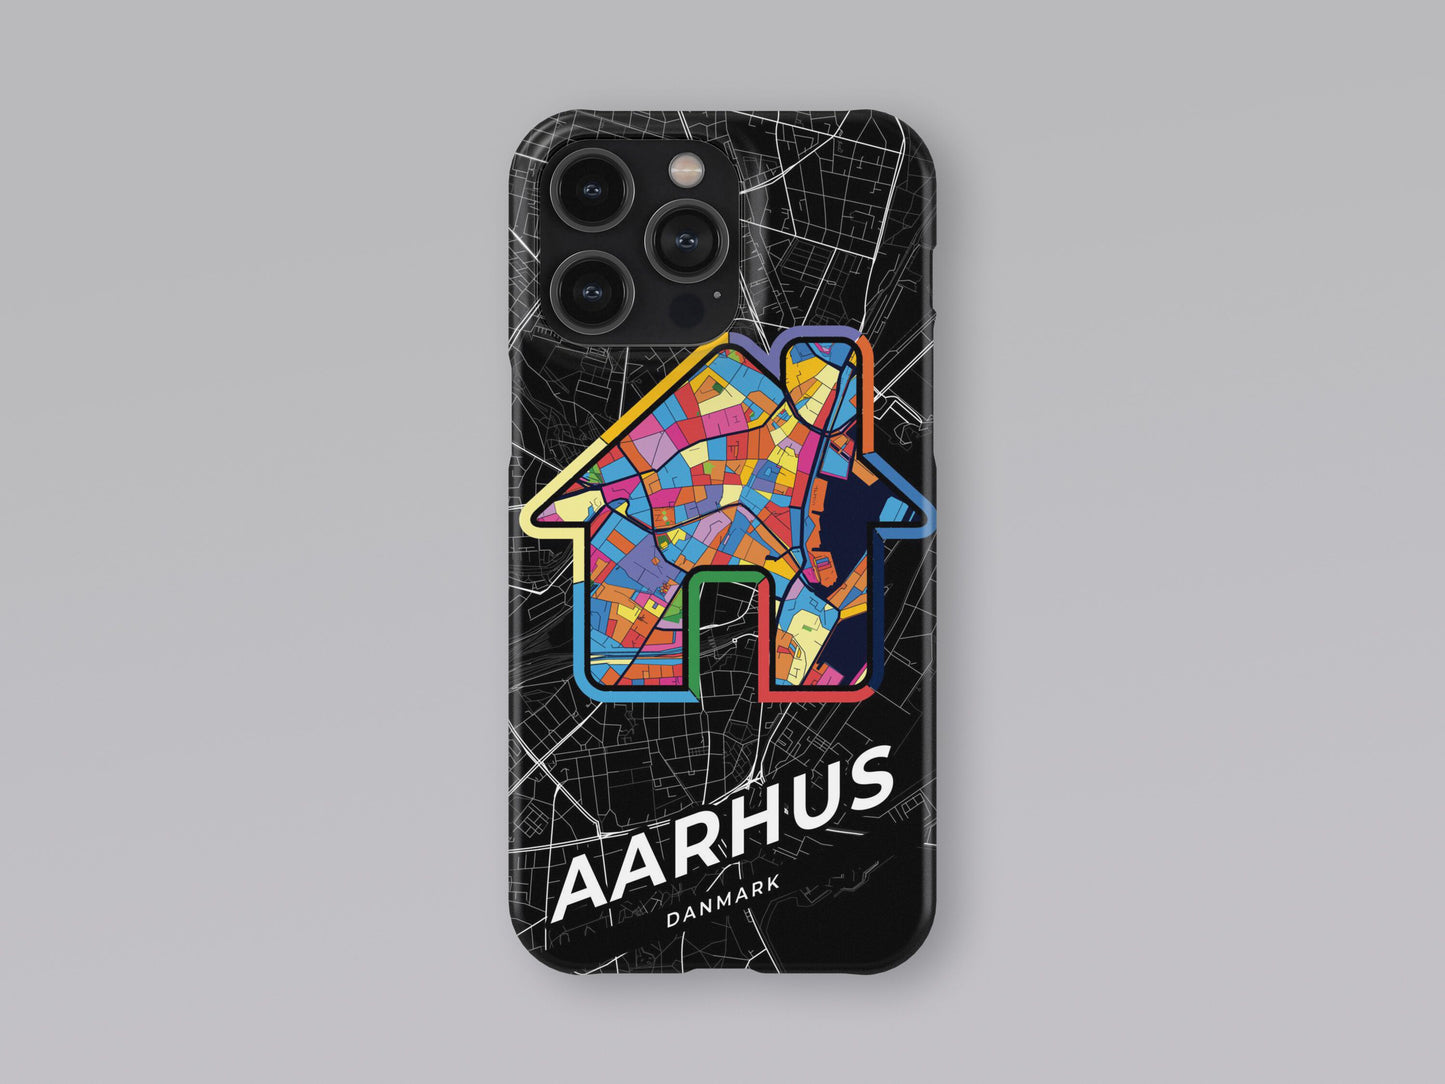 Aarhus Danmark slim phone case with colorful icon. Birthday, wedding or housewarming gift. Couple match cases. 3